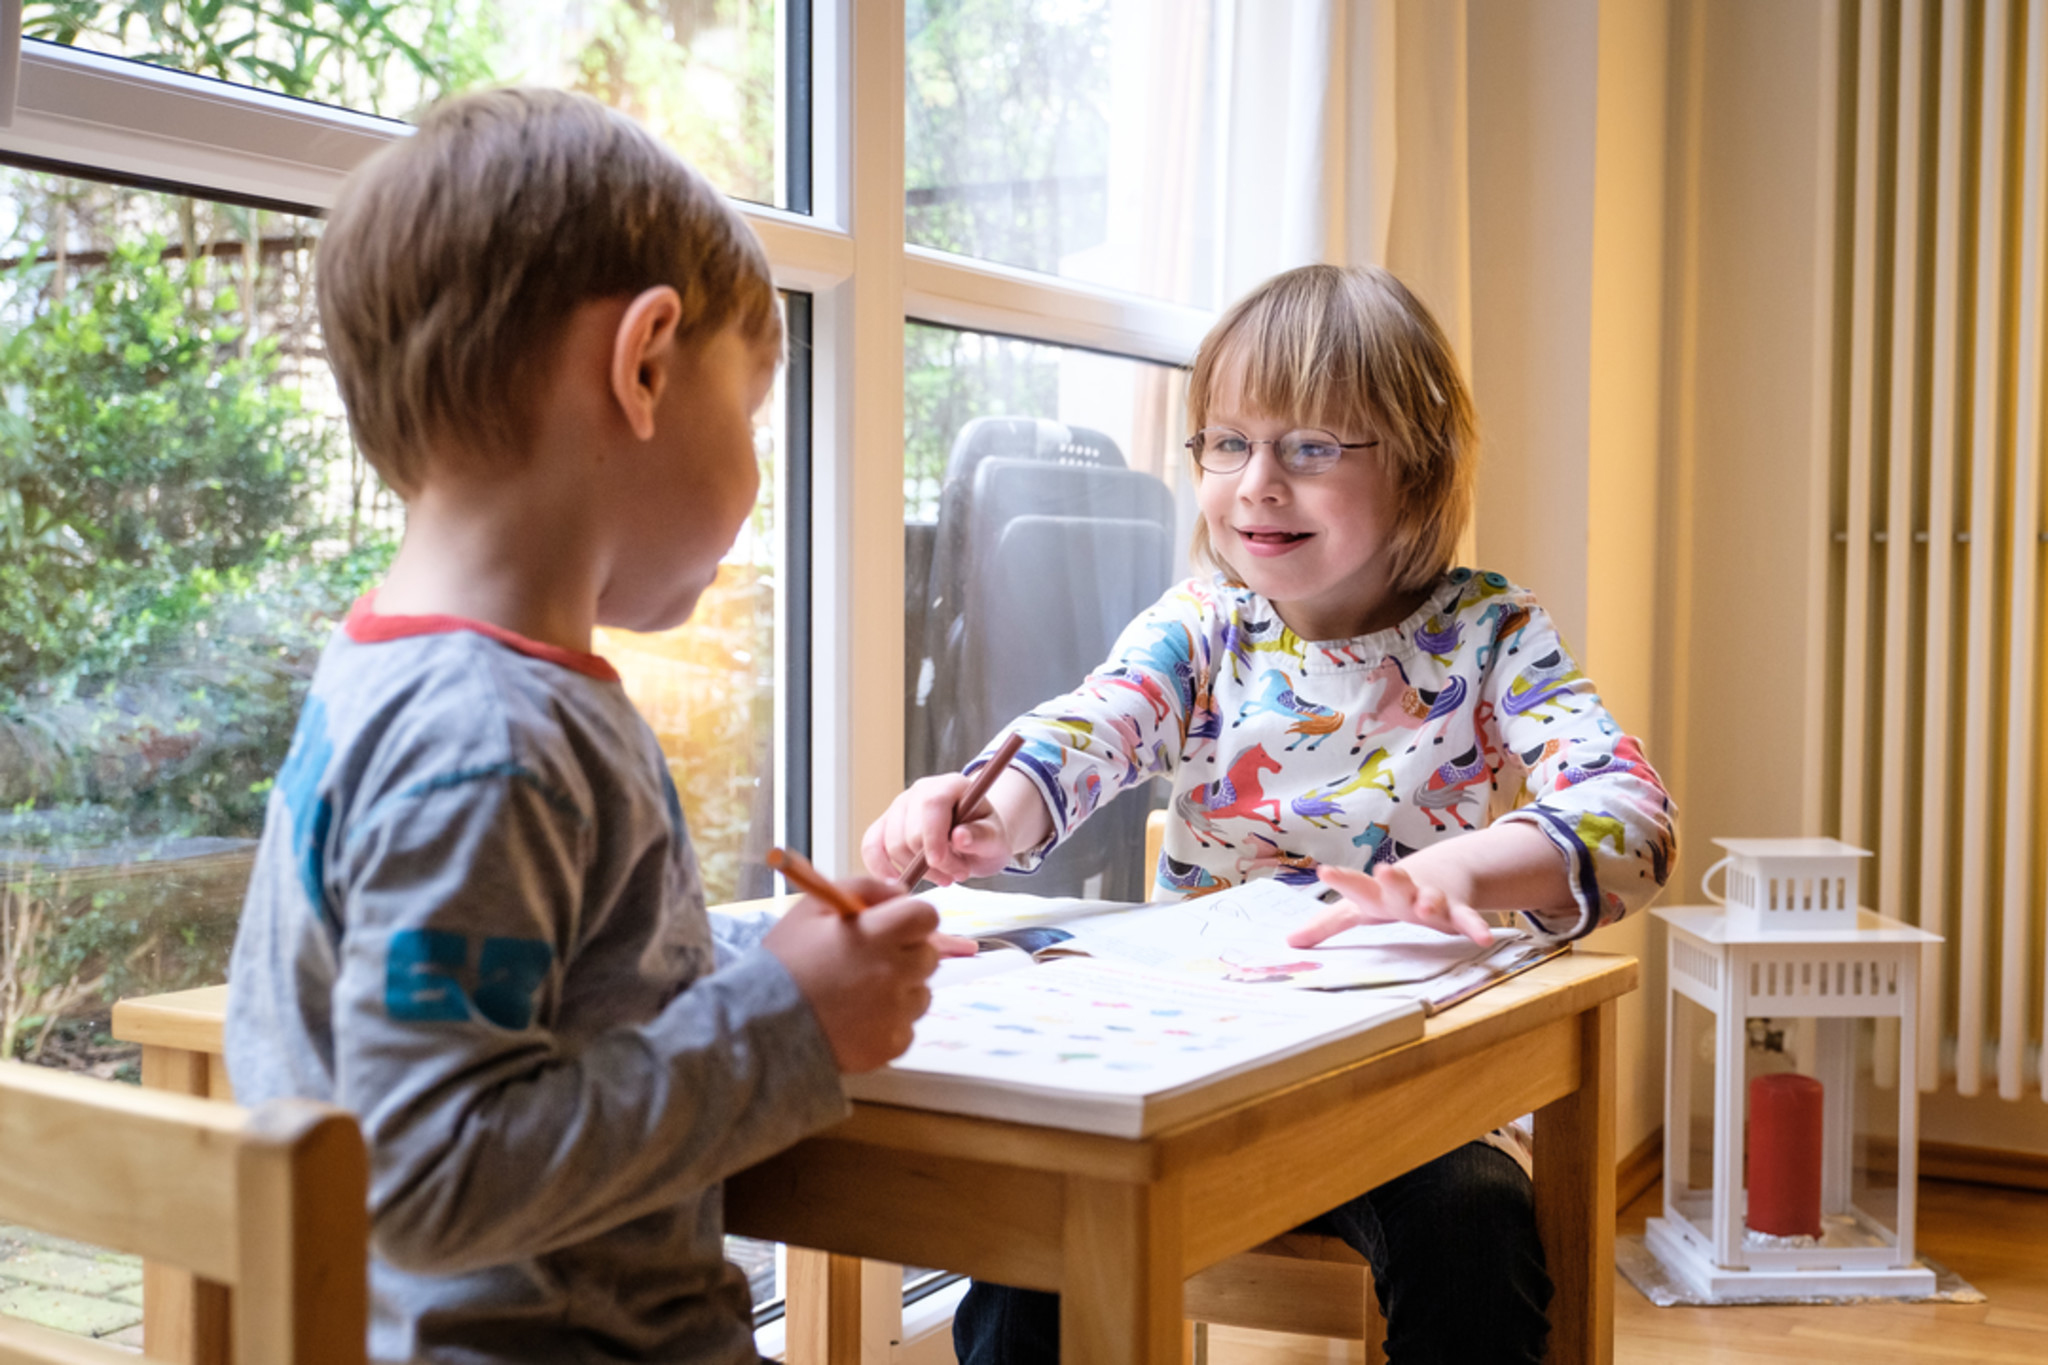 Alltag in einer Familie mit behinderten und nicht behinderten Kindern: Zwei Kinder sitzen an einem Tisch und malen / Everyday life in a family with disabled and non-disabled children: Two children sitting at a table and drawing